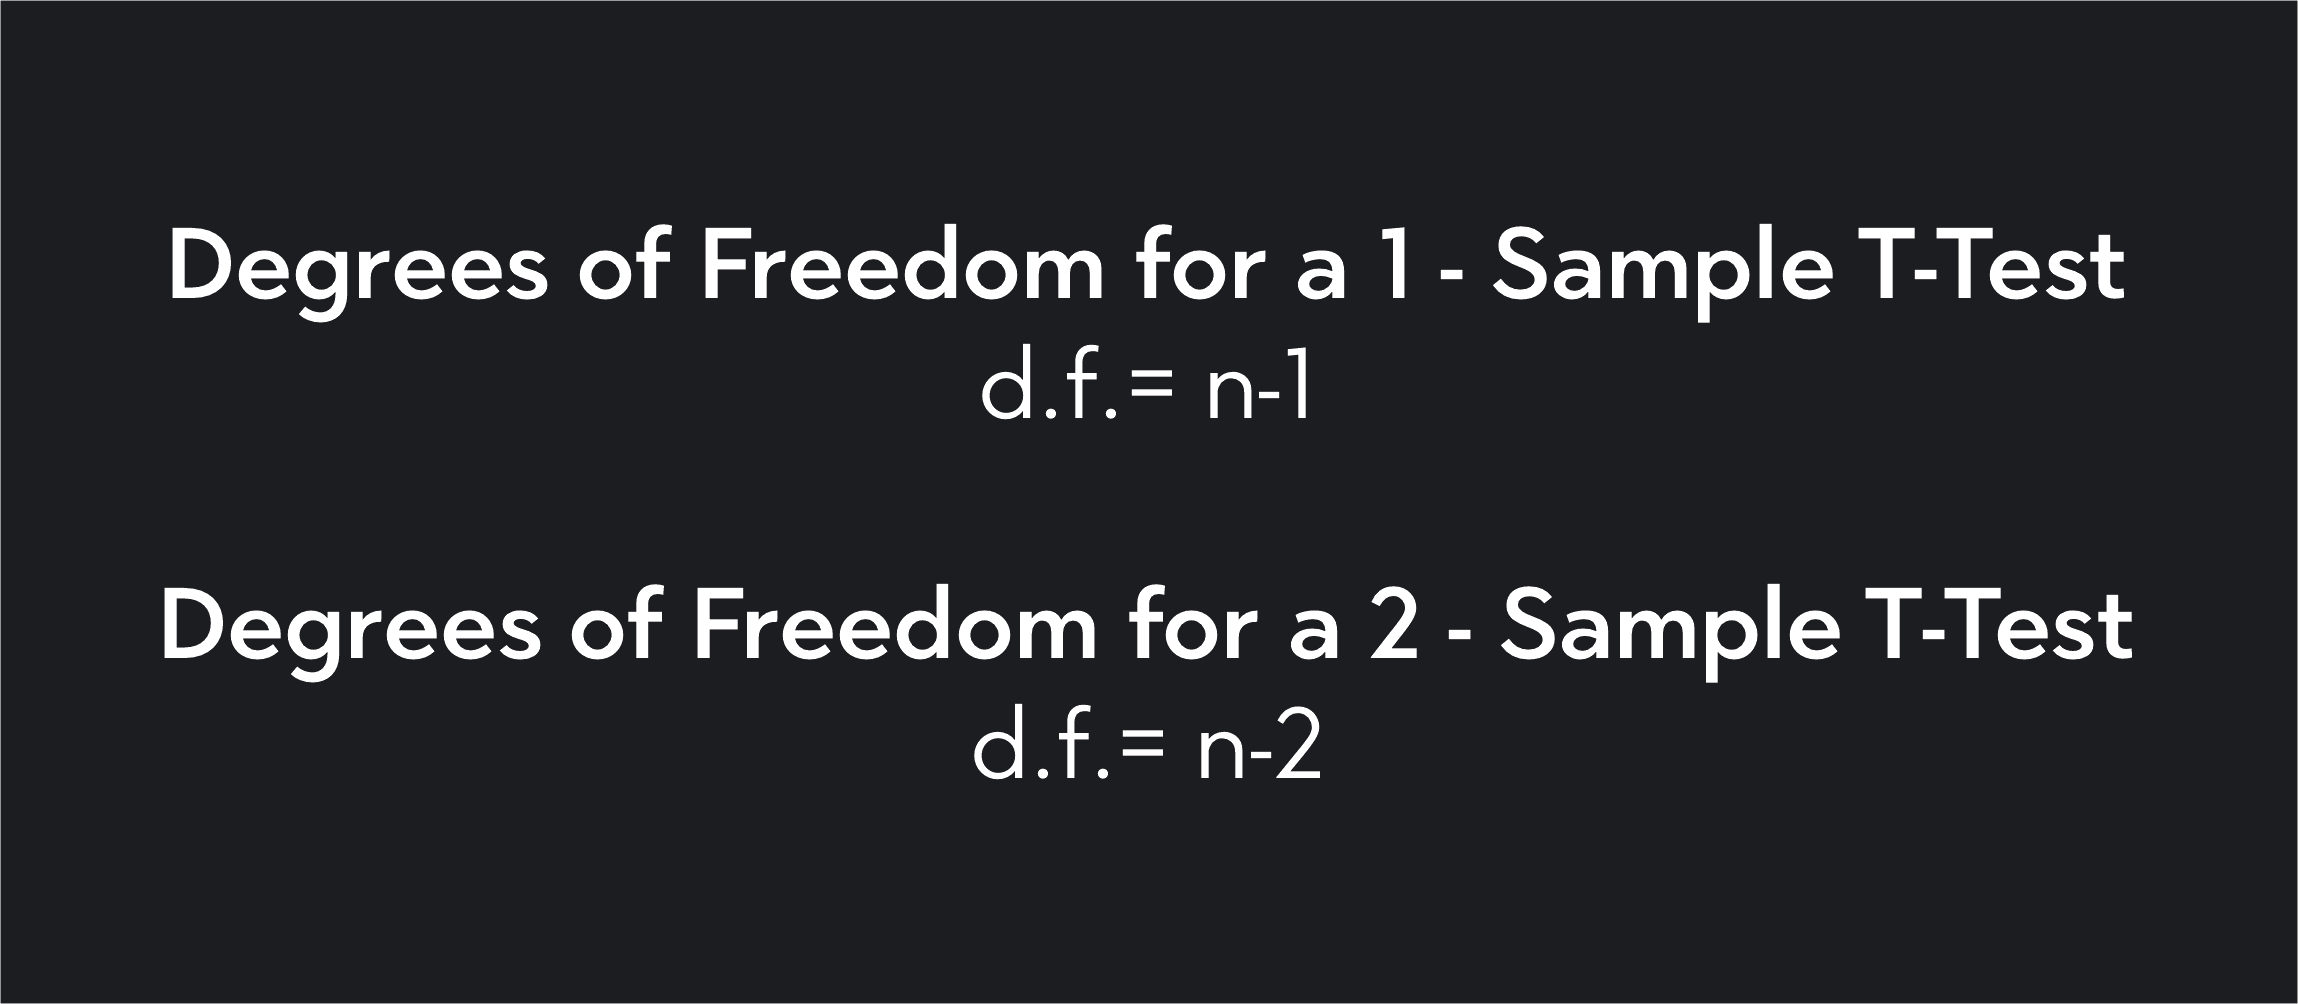 Degrees of Freedom for sample tests